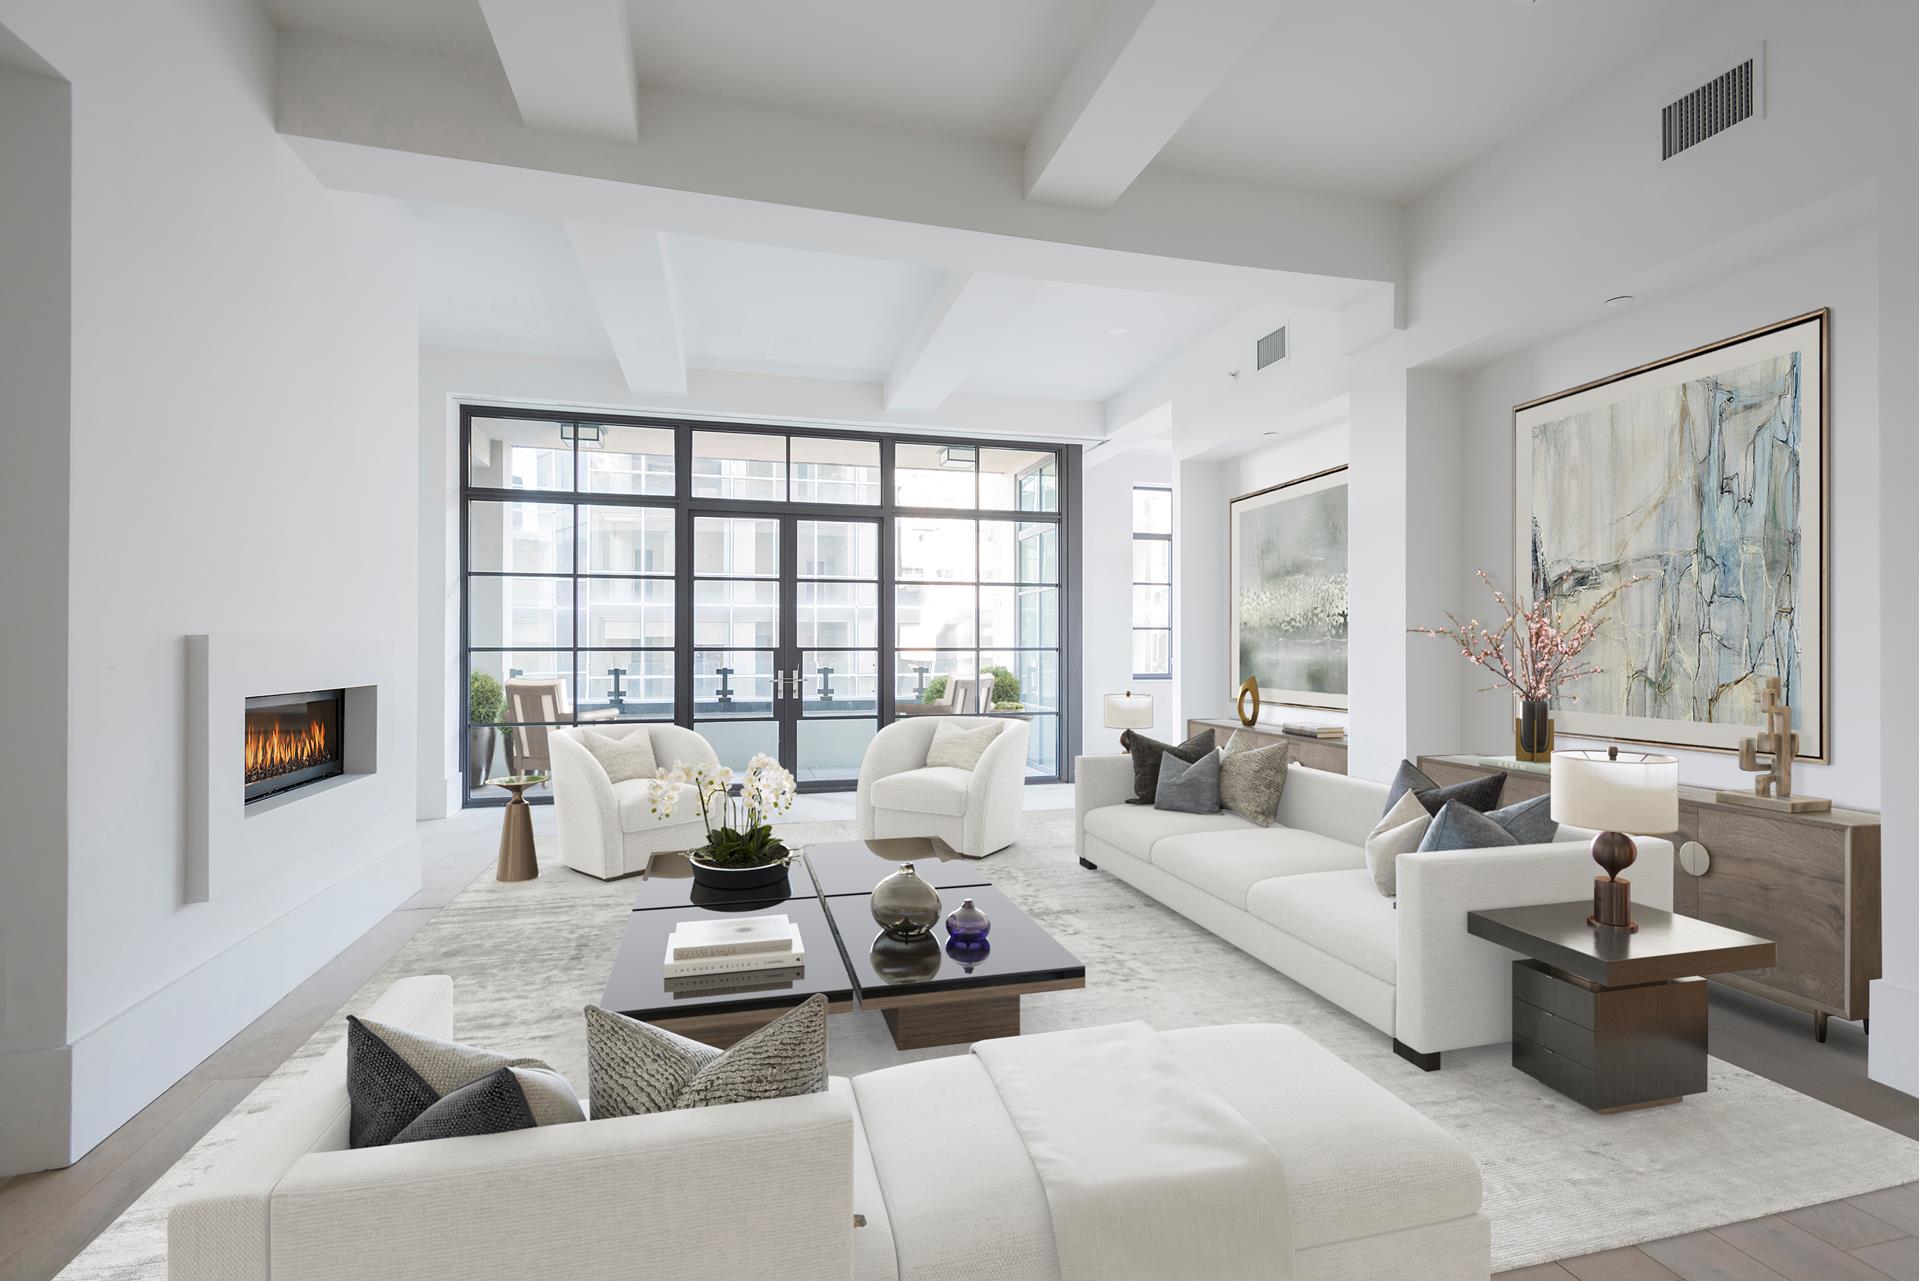 404 Park Avenue Ph16b, Nomad, Downtown, NYC - 3 Bedrooms  
3.5 Bathrooms  
7 Rooms - 